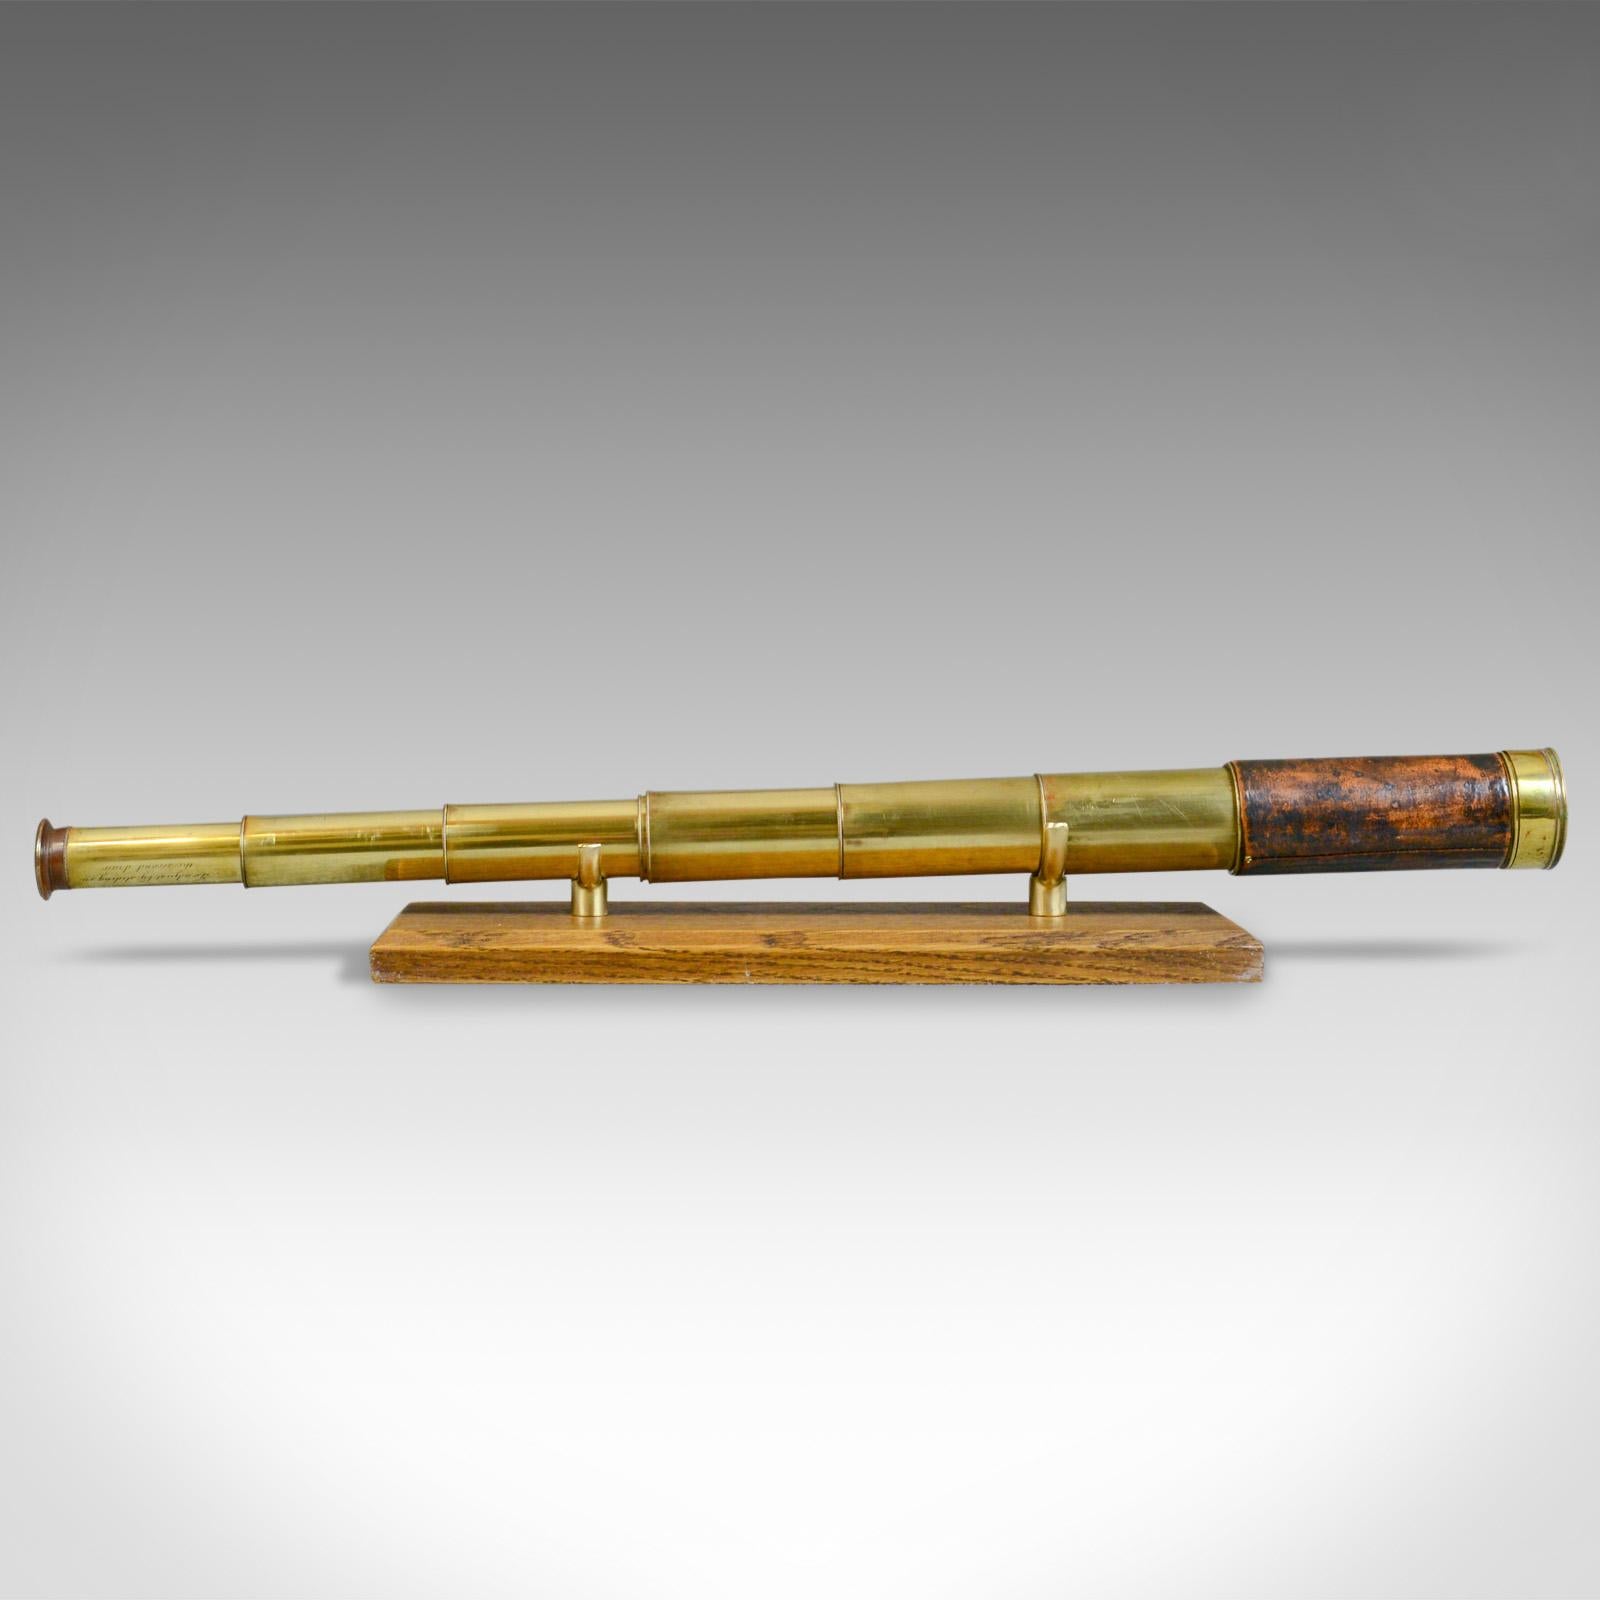 This is an antique seven draw pocket telescope by noted Victorian manufacturer, J.B. Dancer Manchester, a refractor for terrestrial or astronomical use dating to the mid-19th century, circa 1845.

Perfect for bird watching, landscape appreciation,